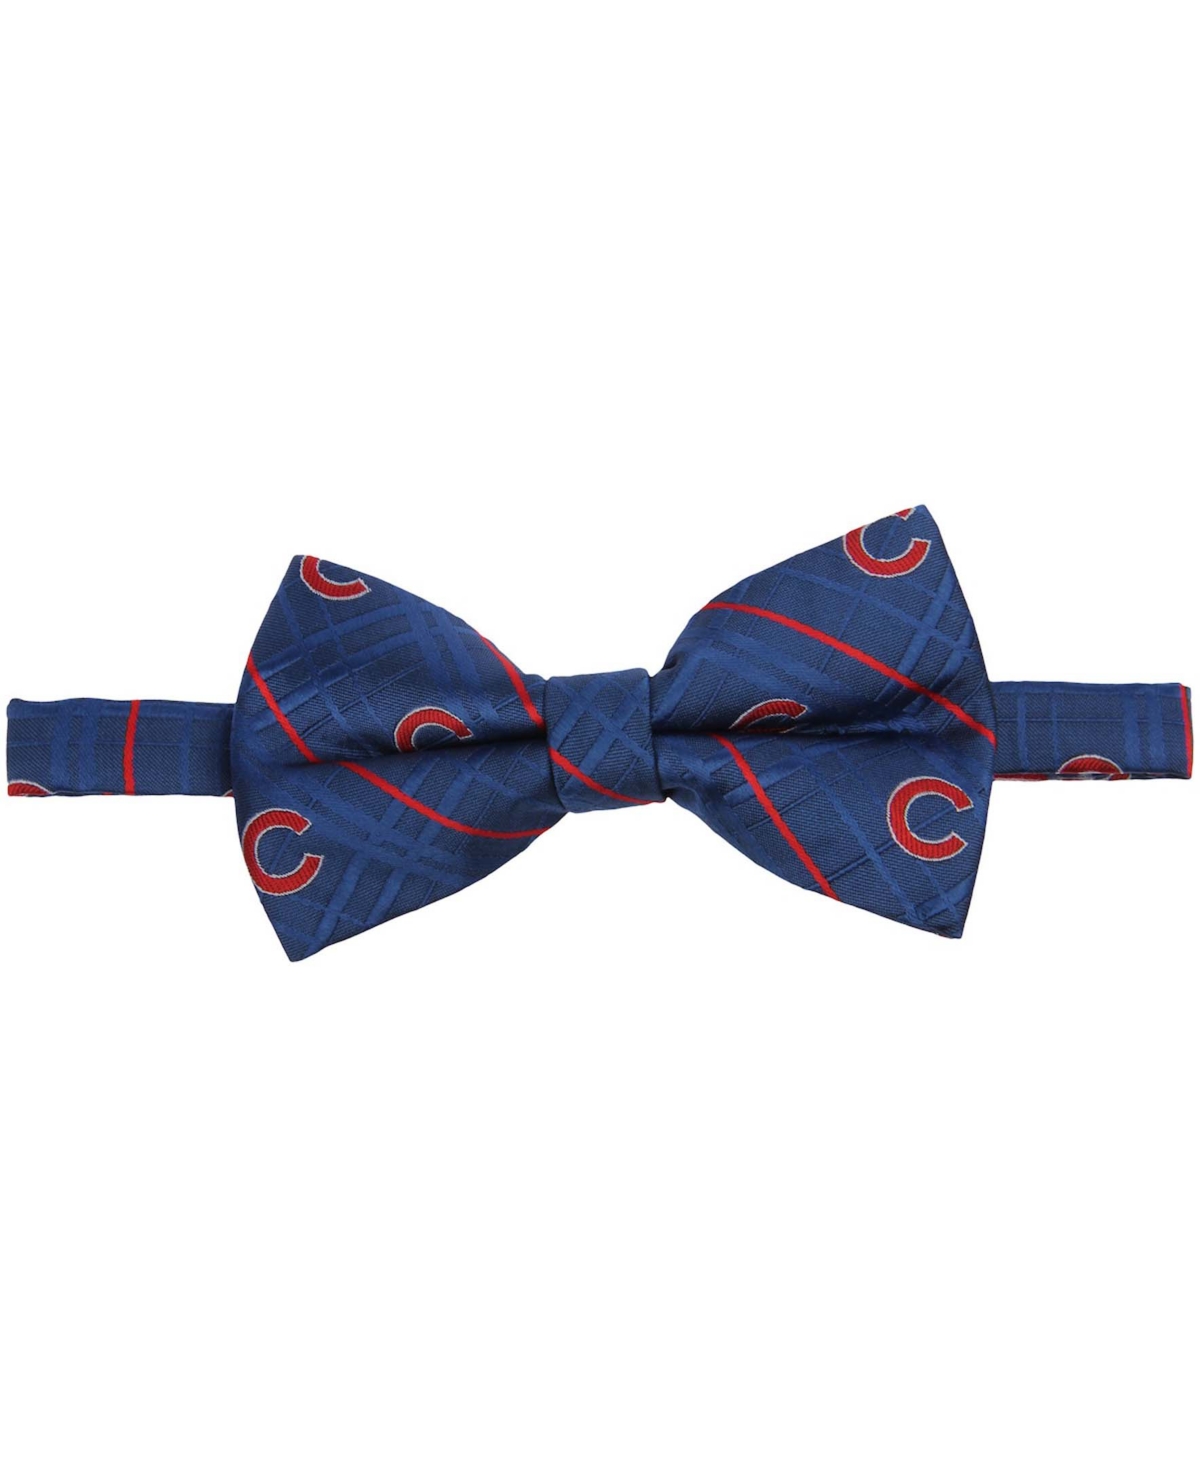 Men's Royal Chicago Cubs Oxford Bow Tie - Royal